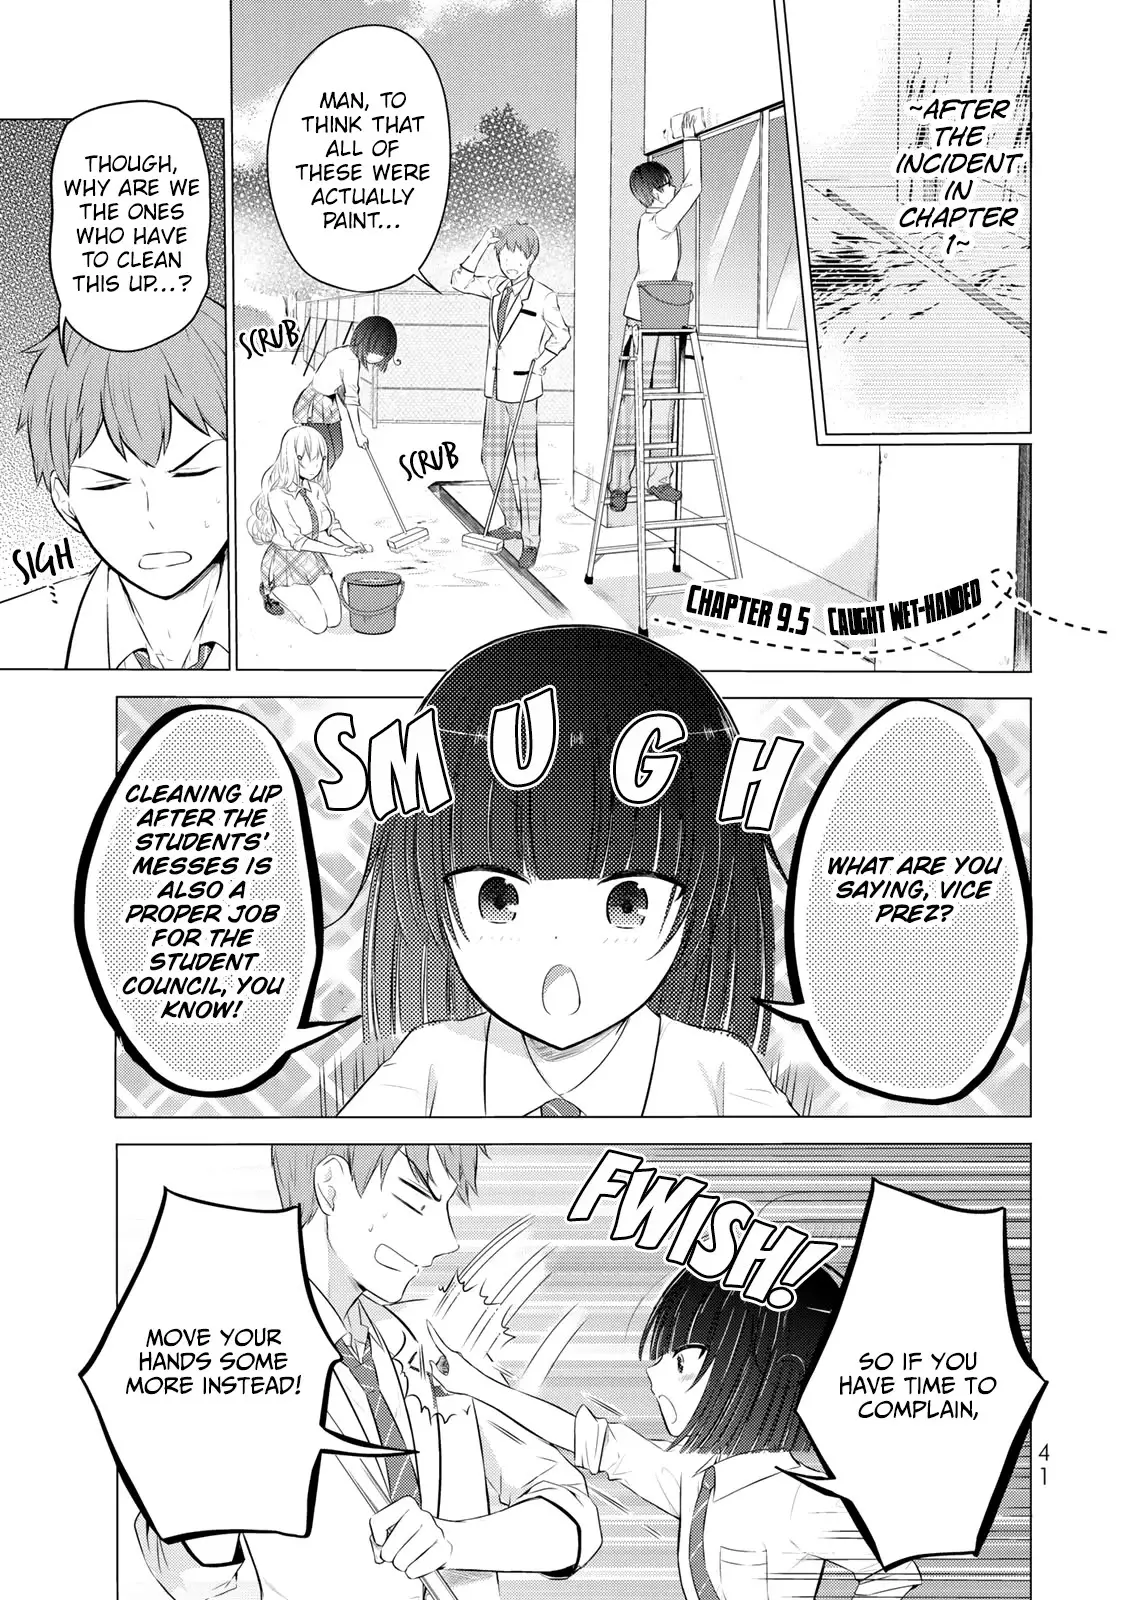 The Student Council President Solves Everything On The Bed - 9.5 page 2-5b822520